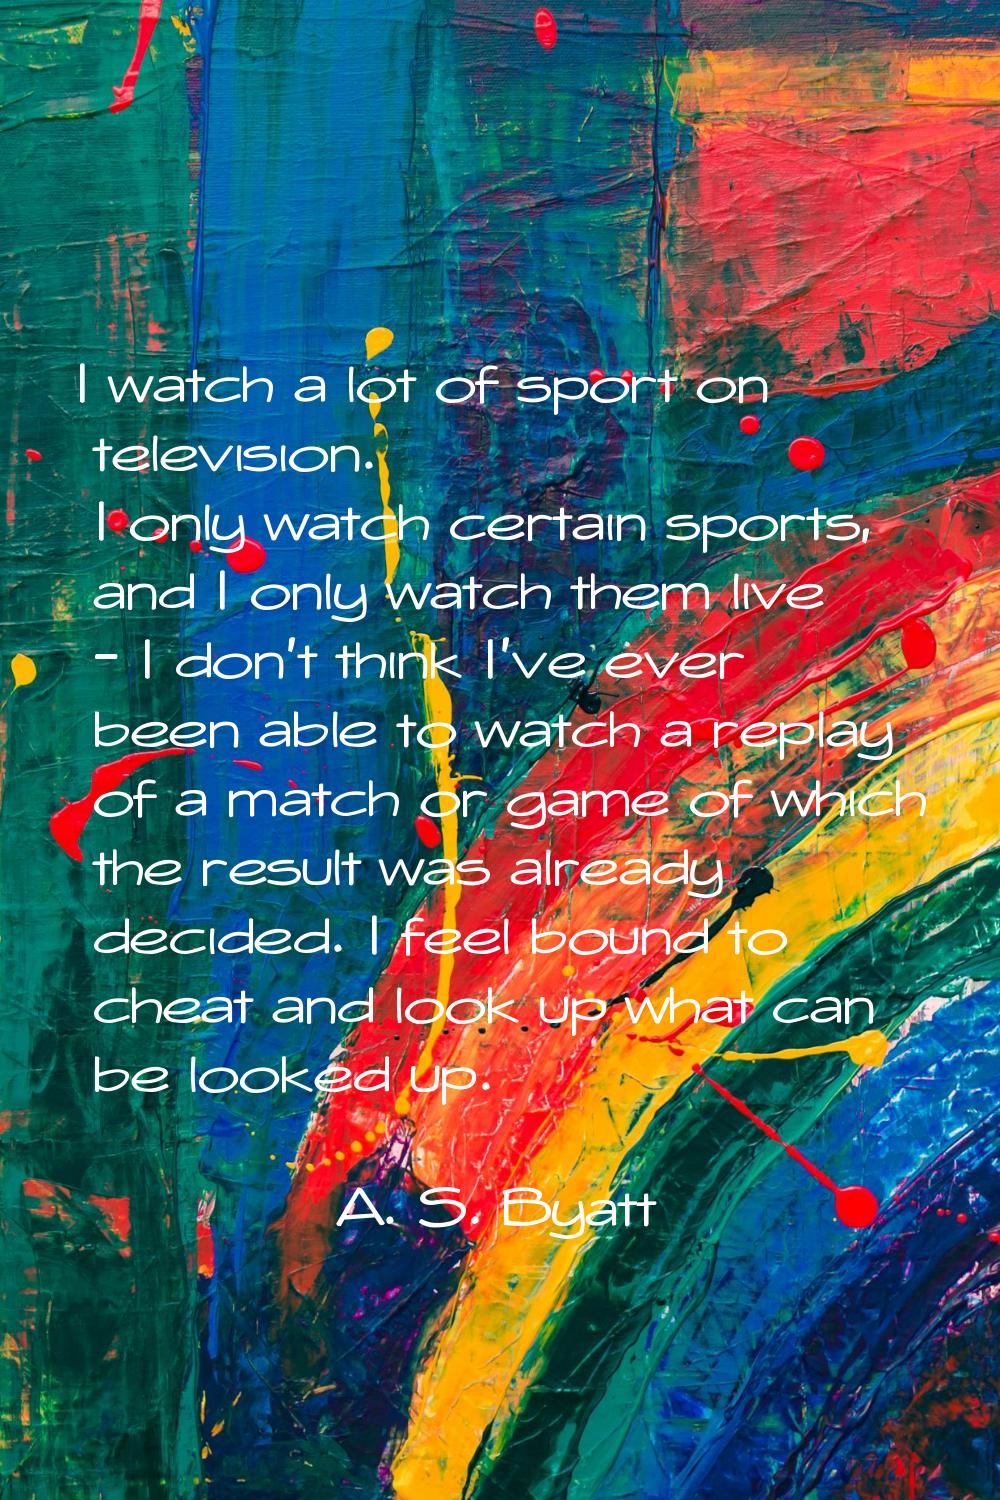 I watch a lot of sport on television. I only watch certain sports, and I only watch them live - I d